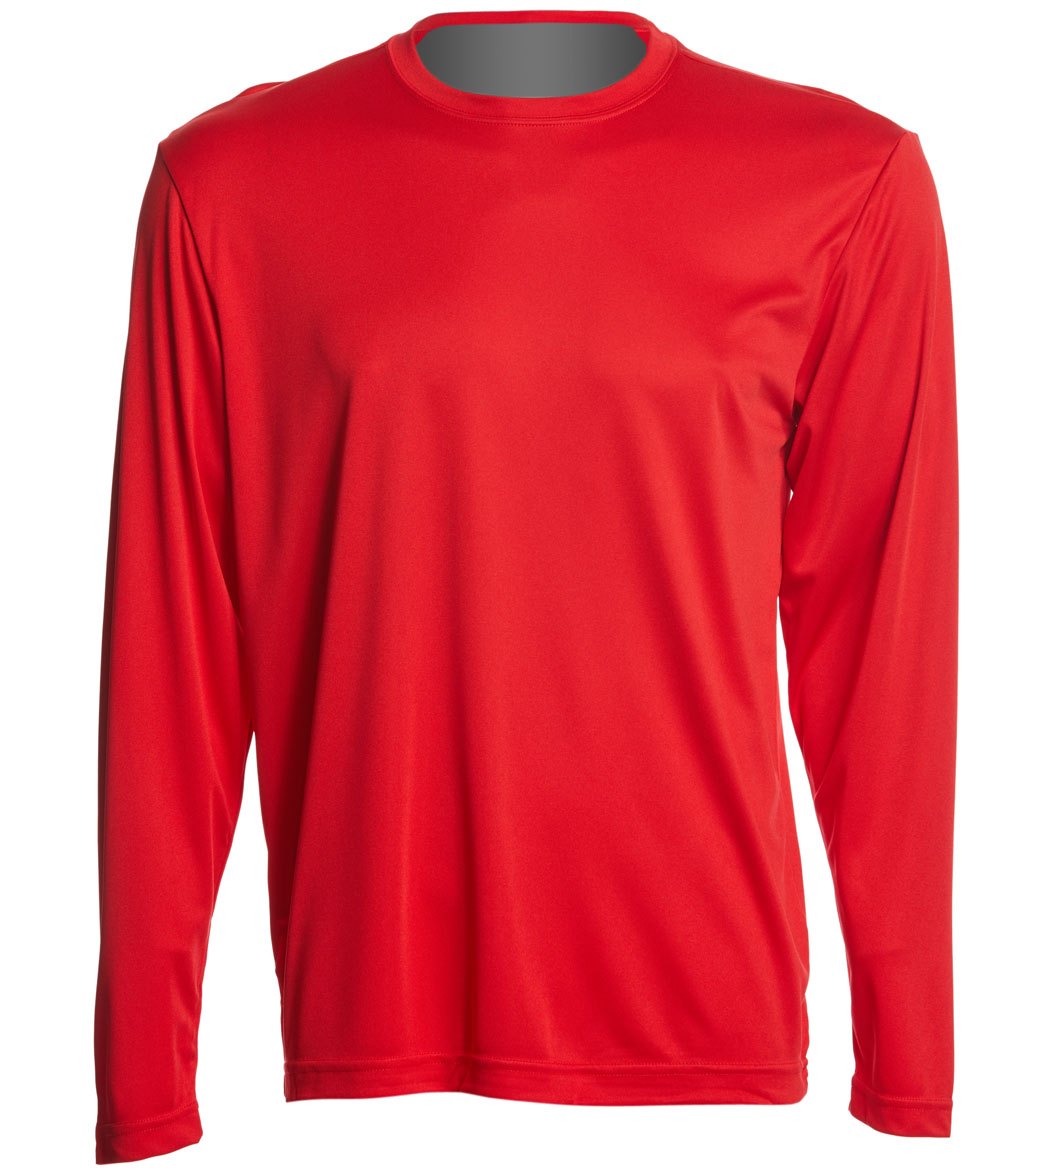 Men's Long Sleeve Posicharge Competitortm Tee Shirt - True Red Large Polyester - Swimoutlet.com